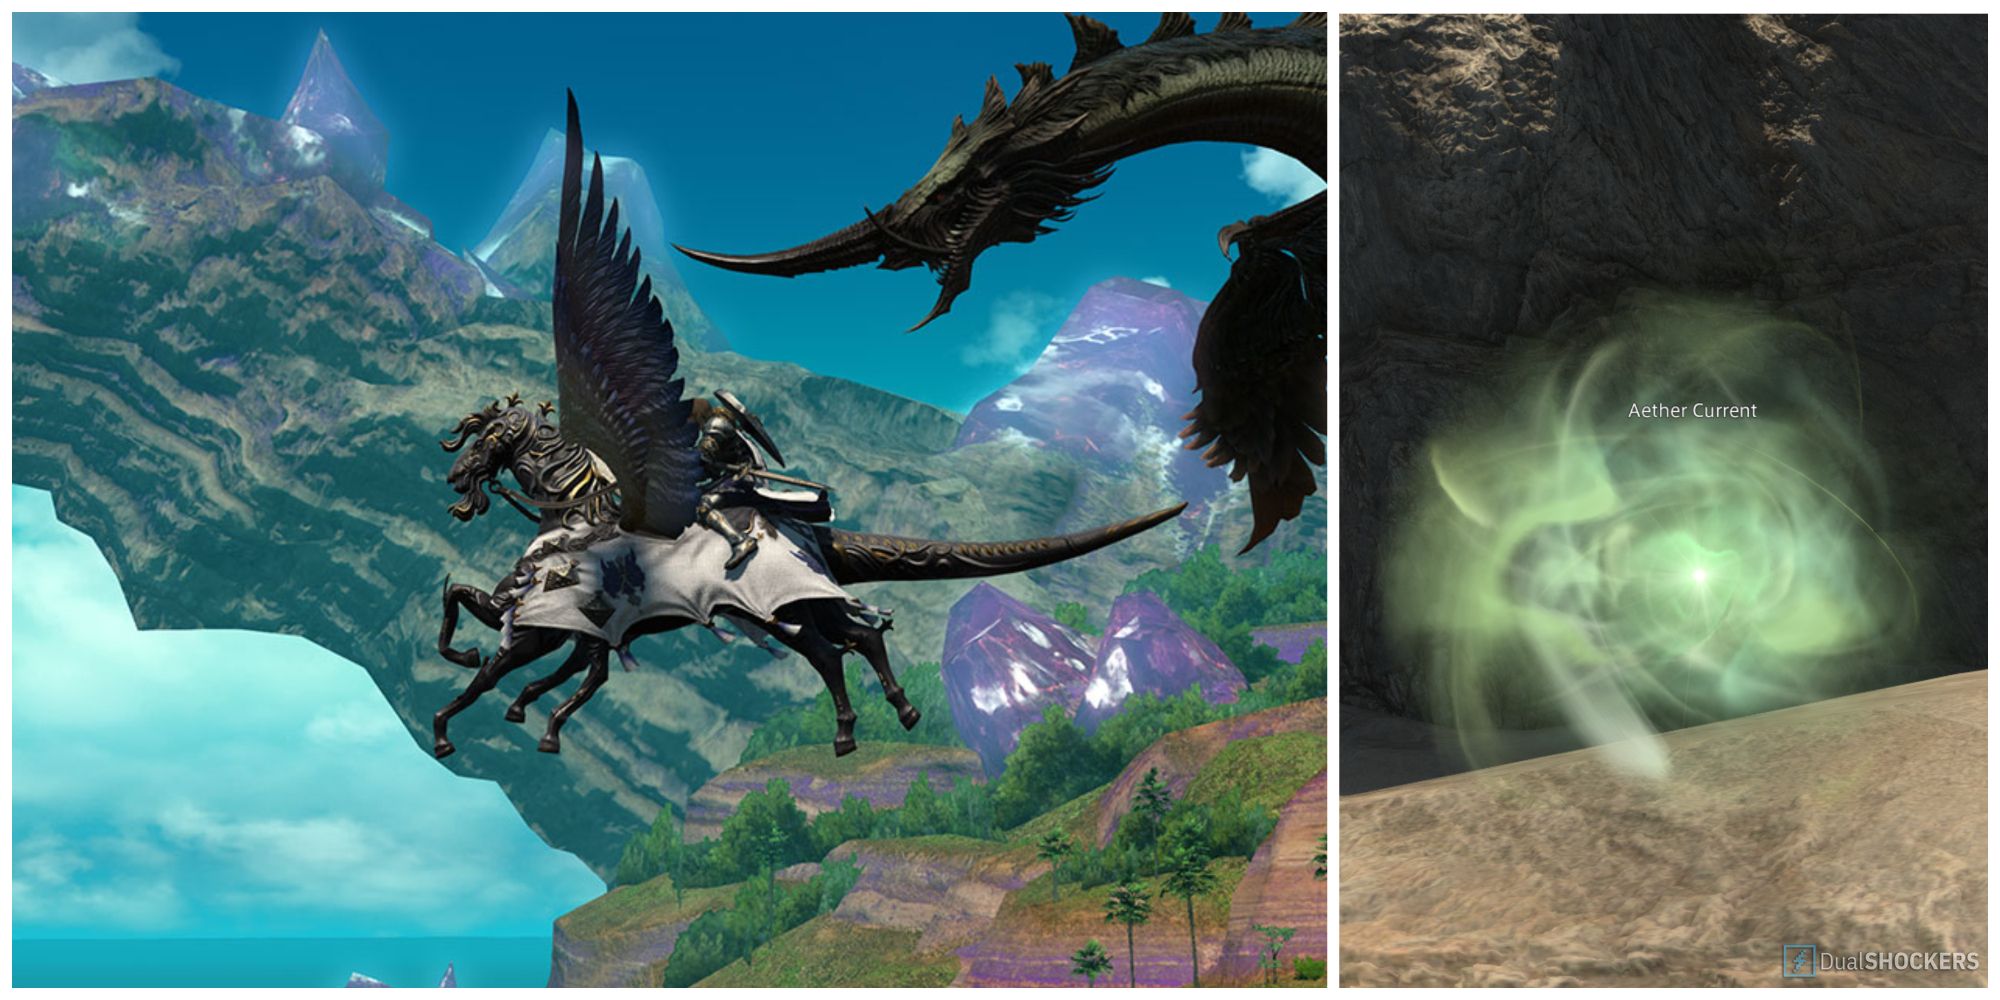 A screenshot of a character riding a flying mount and an aether current from Final Fantasy 14.